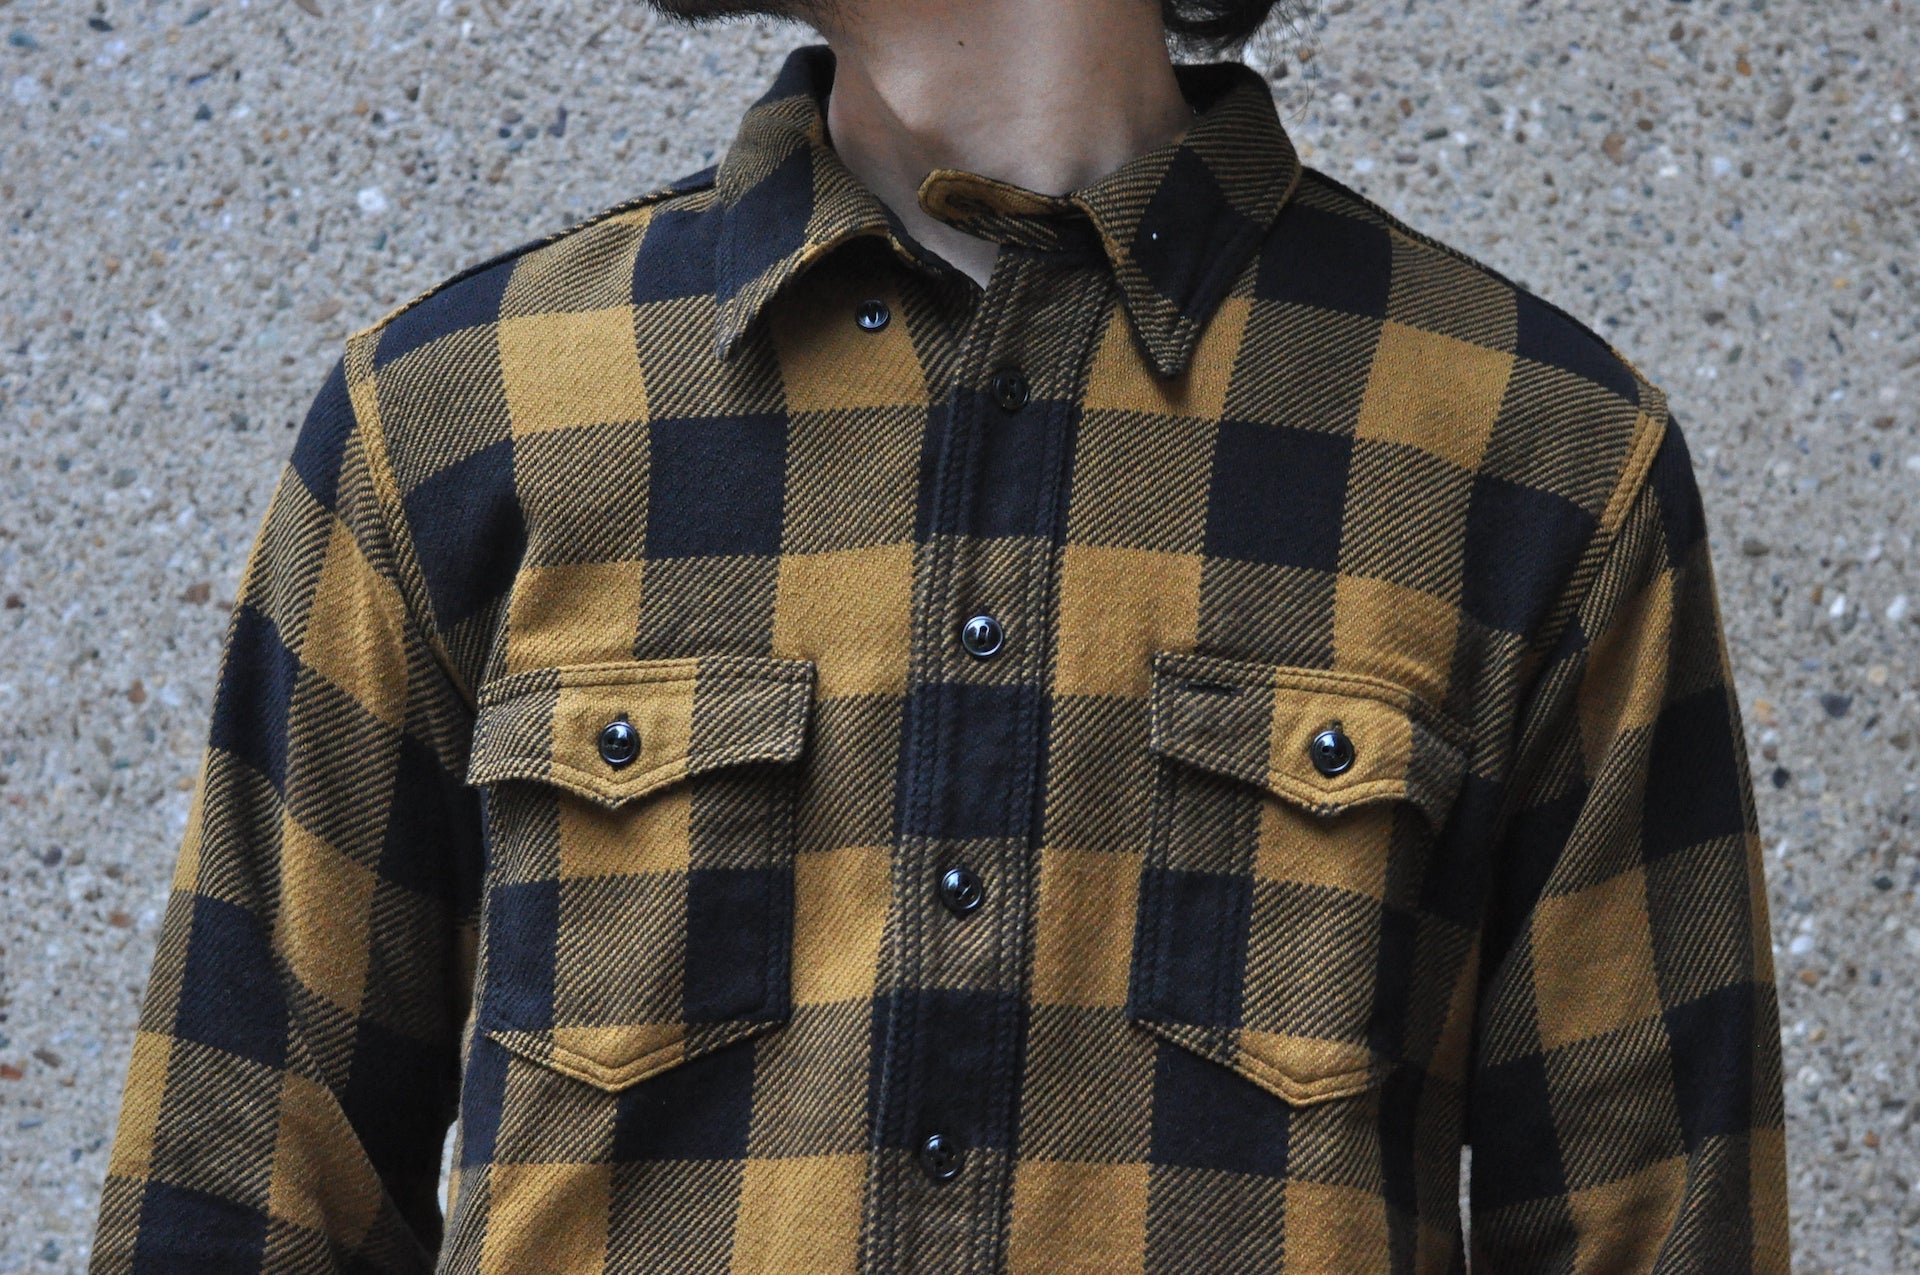 Stevenson Overall Co. 'Pathfinder' Heavyweight Selvage Flannel Early Workshirt (Yellow Ocher Plaid)